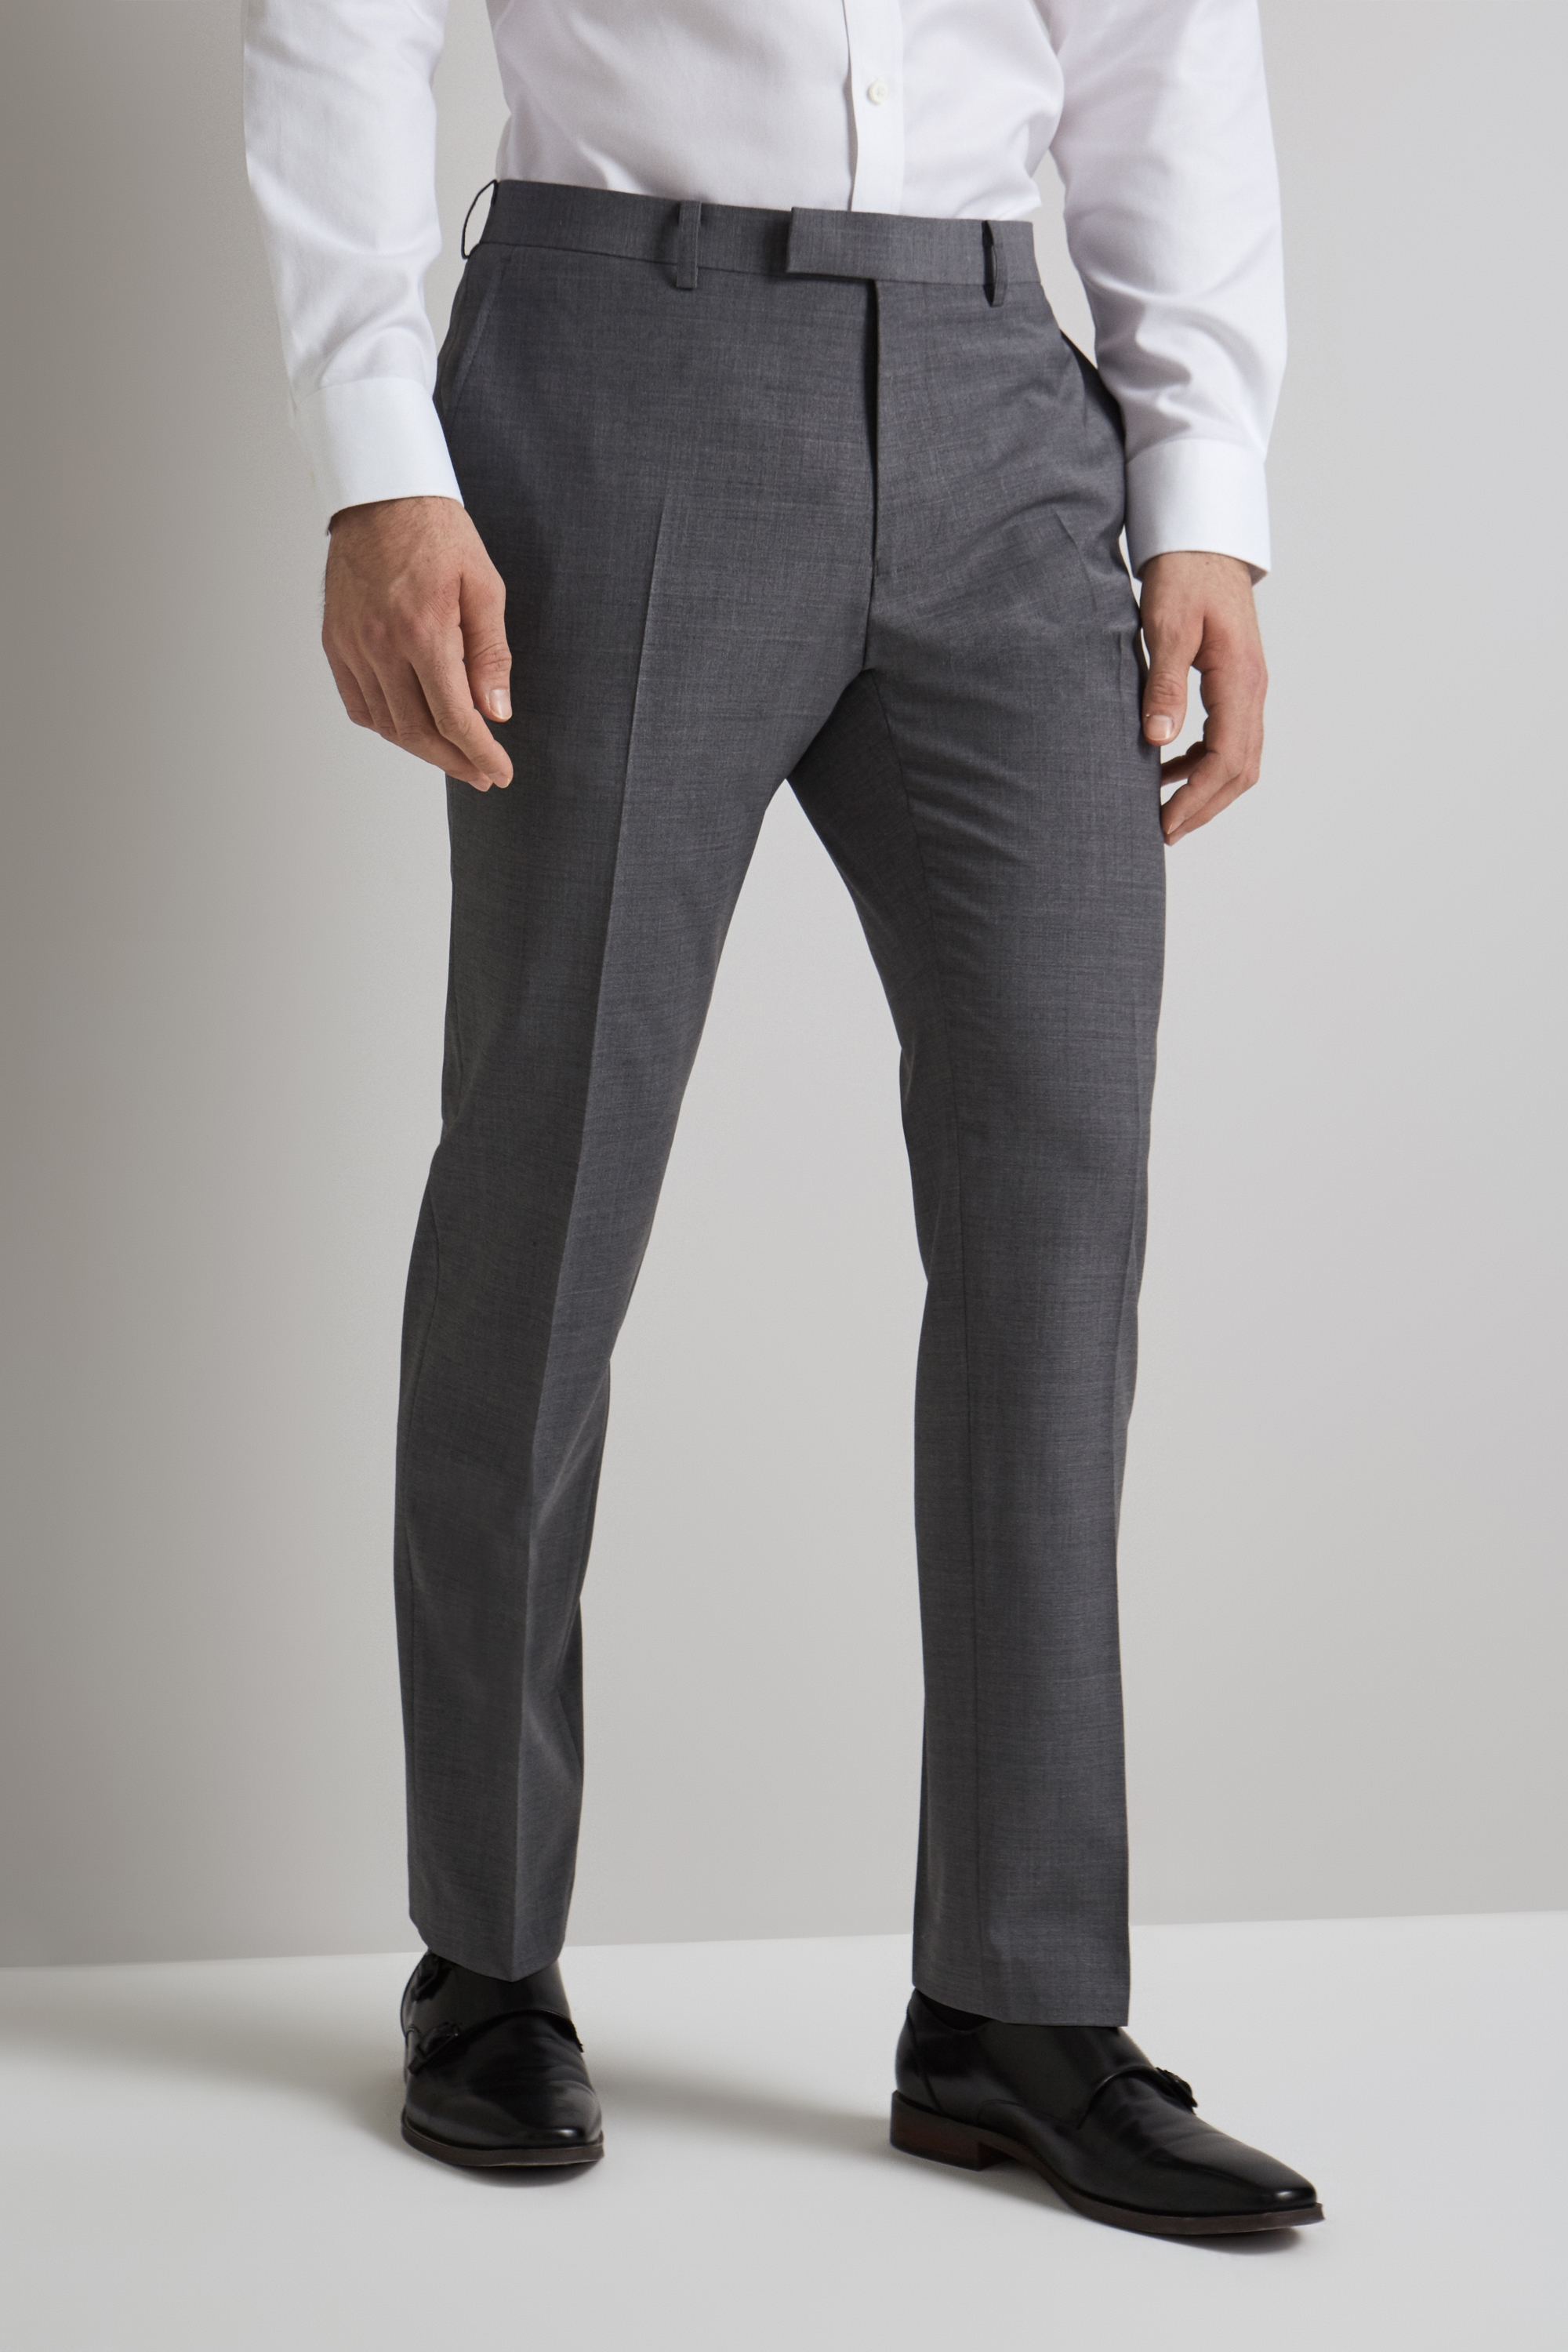 grey pants formal outfit